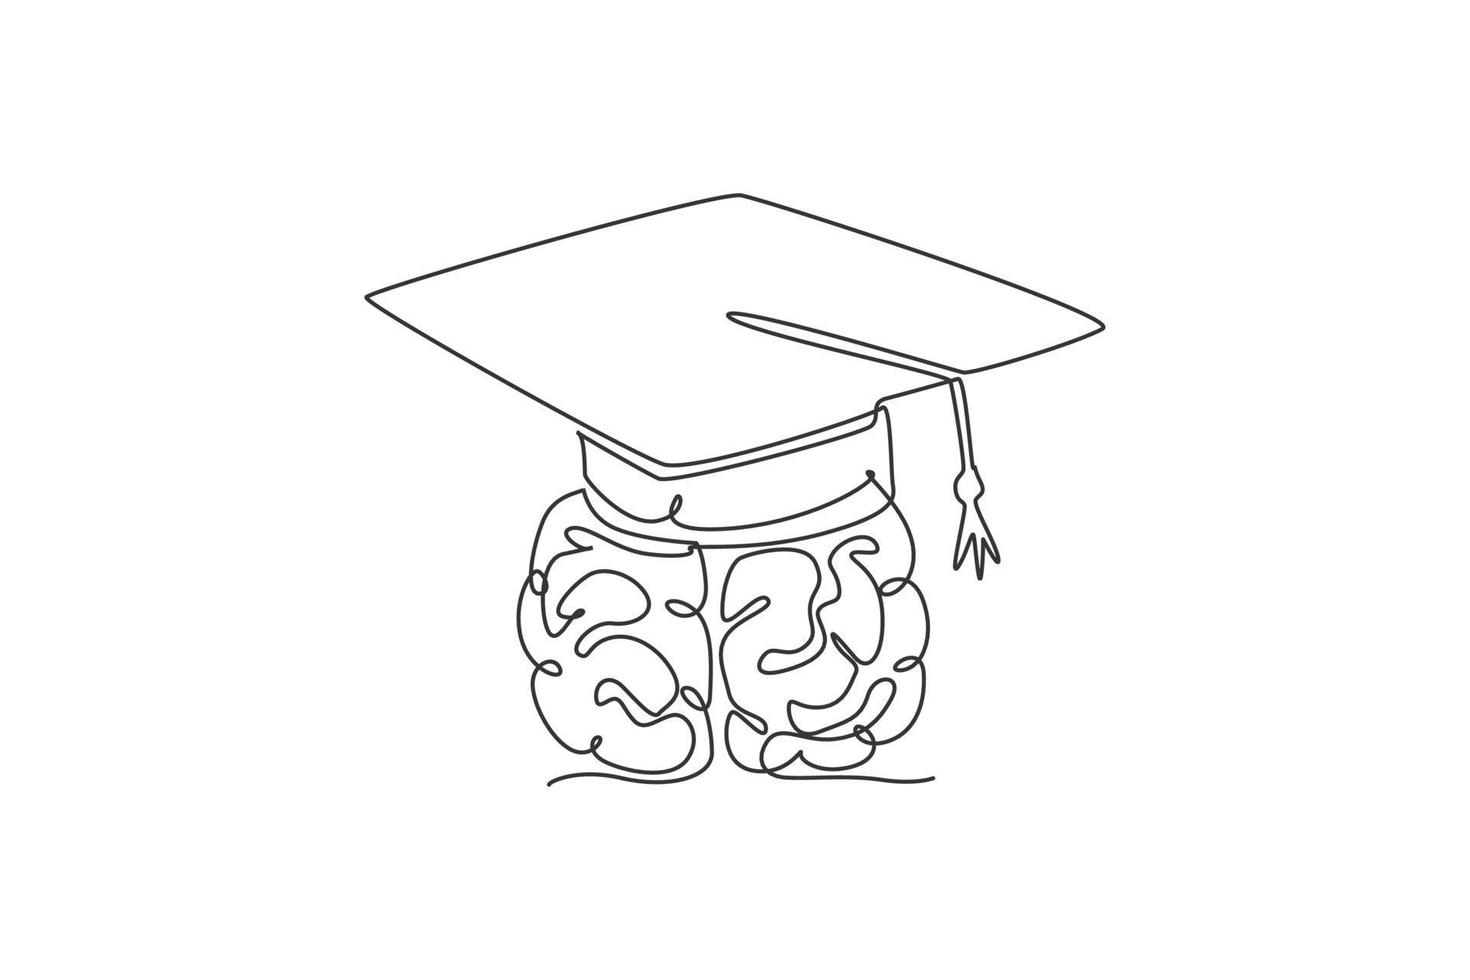 Single continuous line drawing of human brain wearing graduation cap logo label. Academical study course logotype icon concept. Modern one line draw graphic design vector illustration